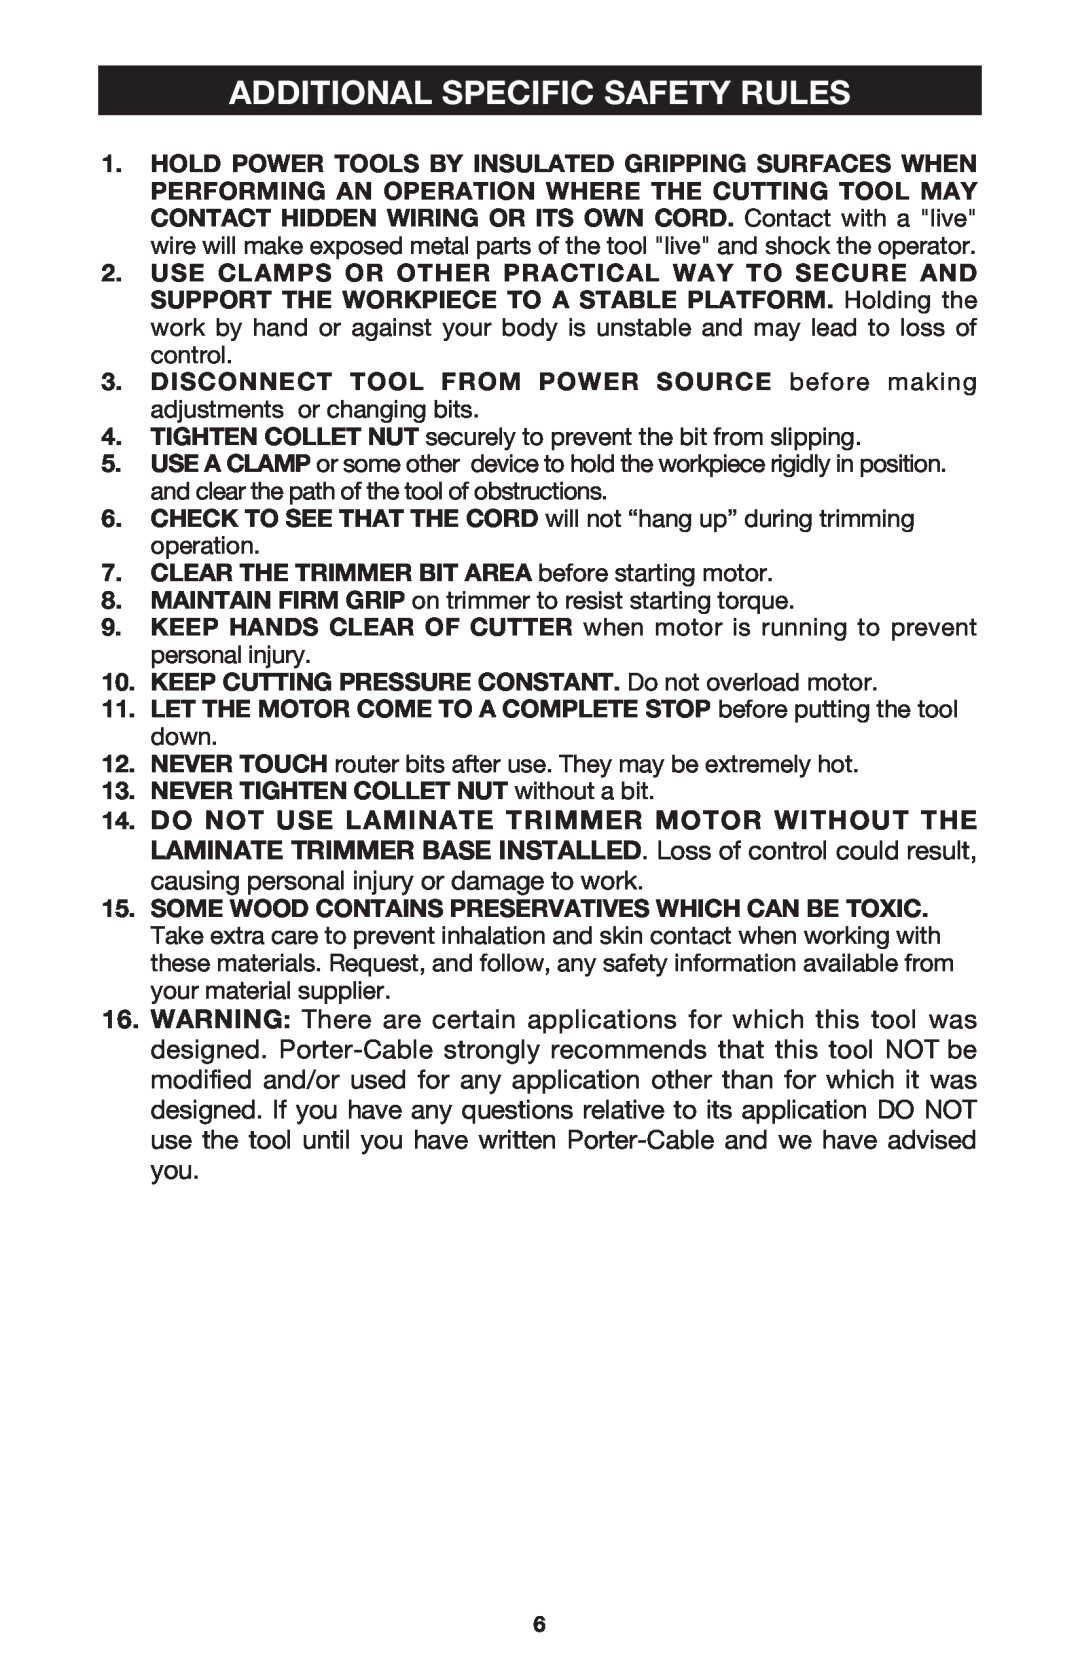 Porter-Cable 7310 instruction manual Additional Specific Safety Rules 